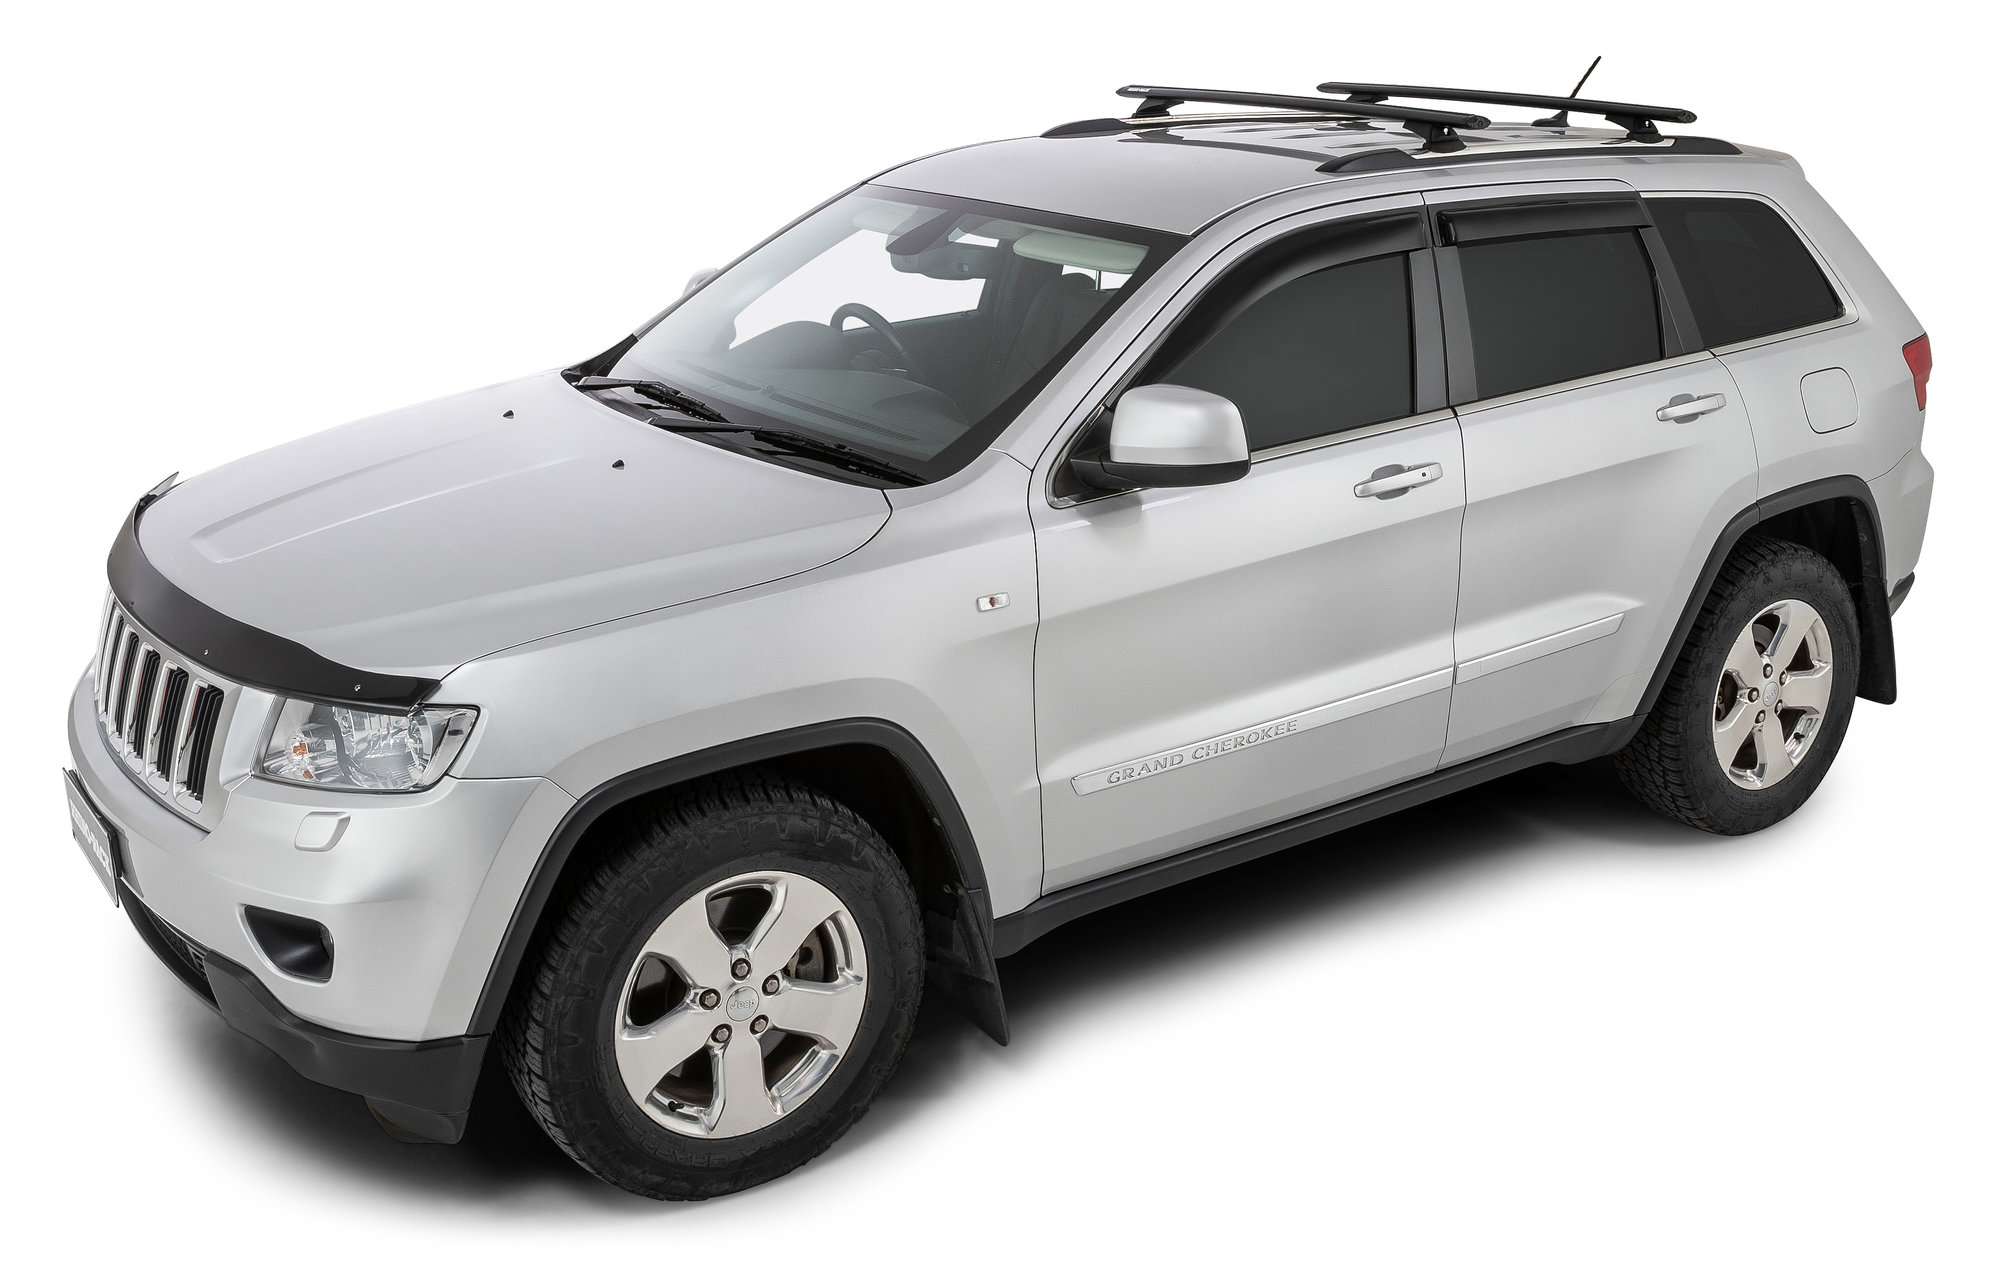 Rhino-Rack Vortex RCL Roof Rack System for 11-18 Jeep Grand Cherokee WK2  with Factory Metal Roof Rails | Quadratec